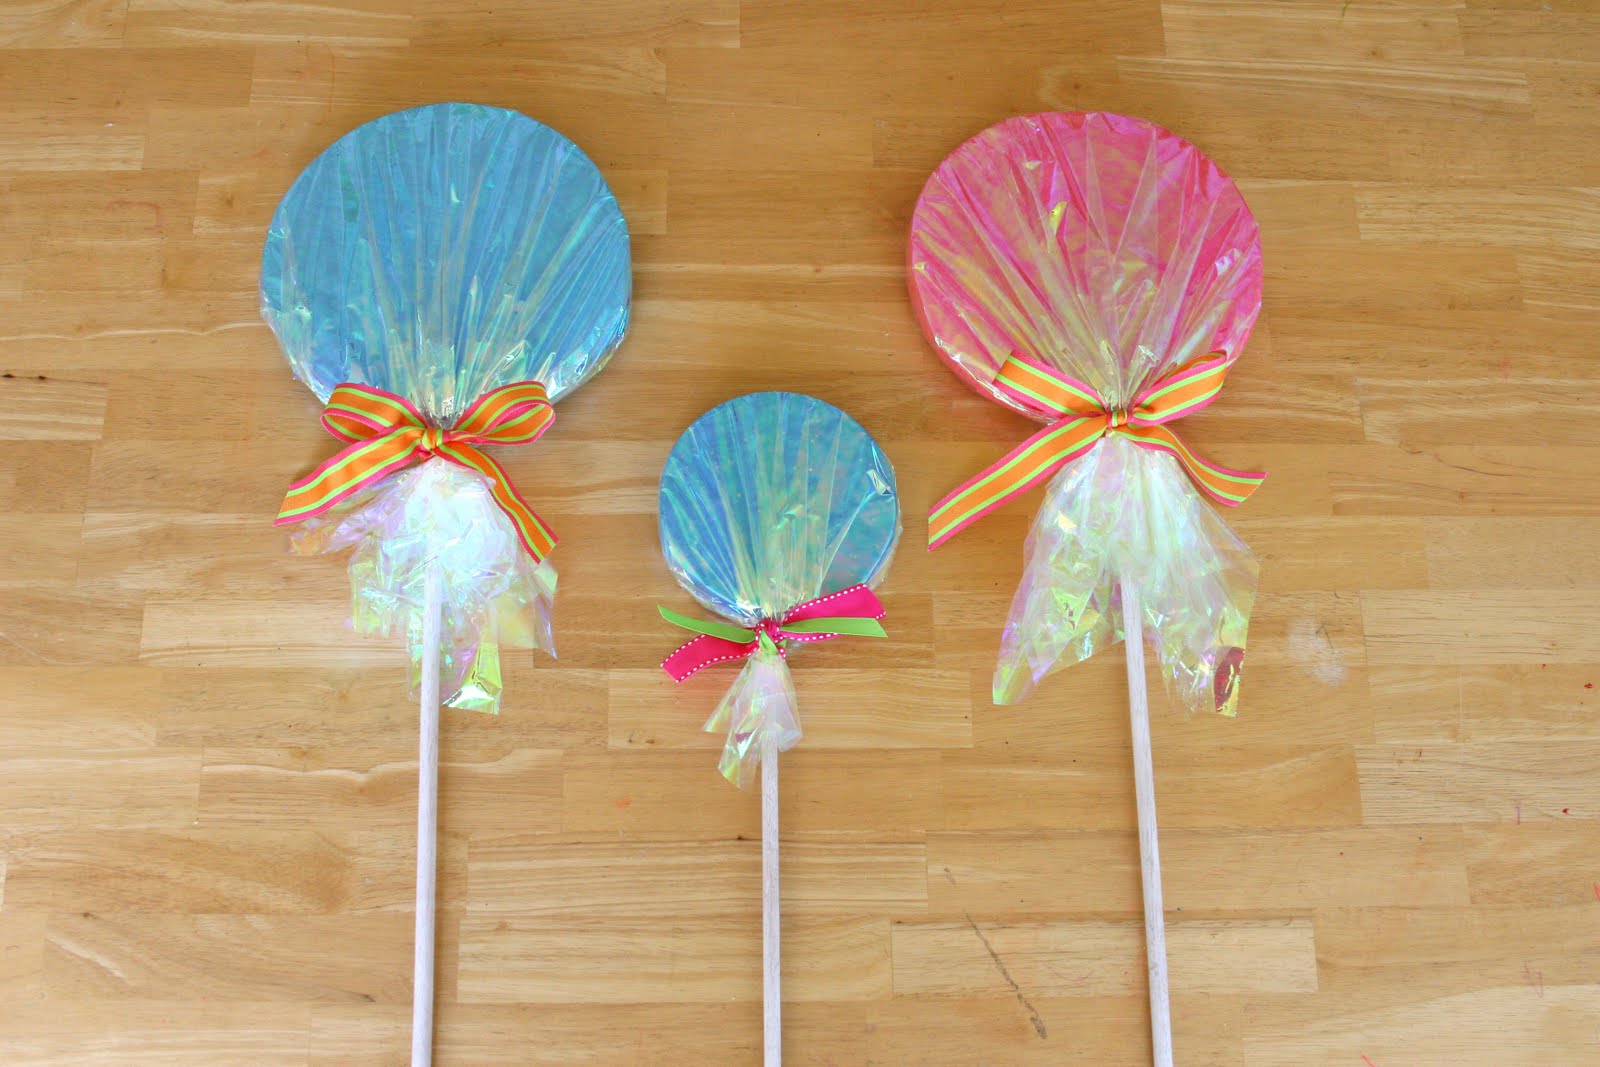 Glorious Treats: {How-to} Make Giant Lollipop Decorations